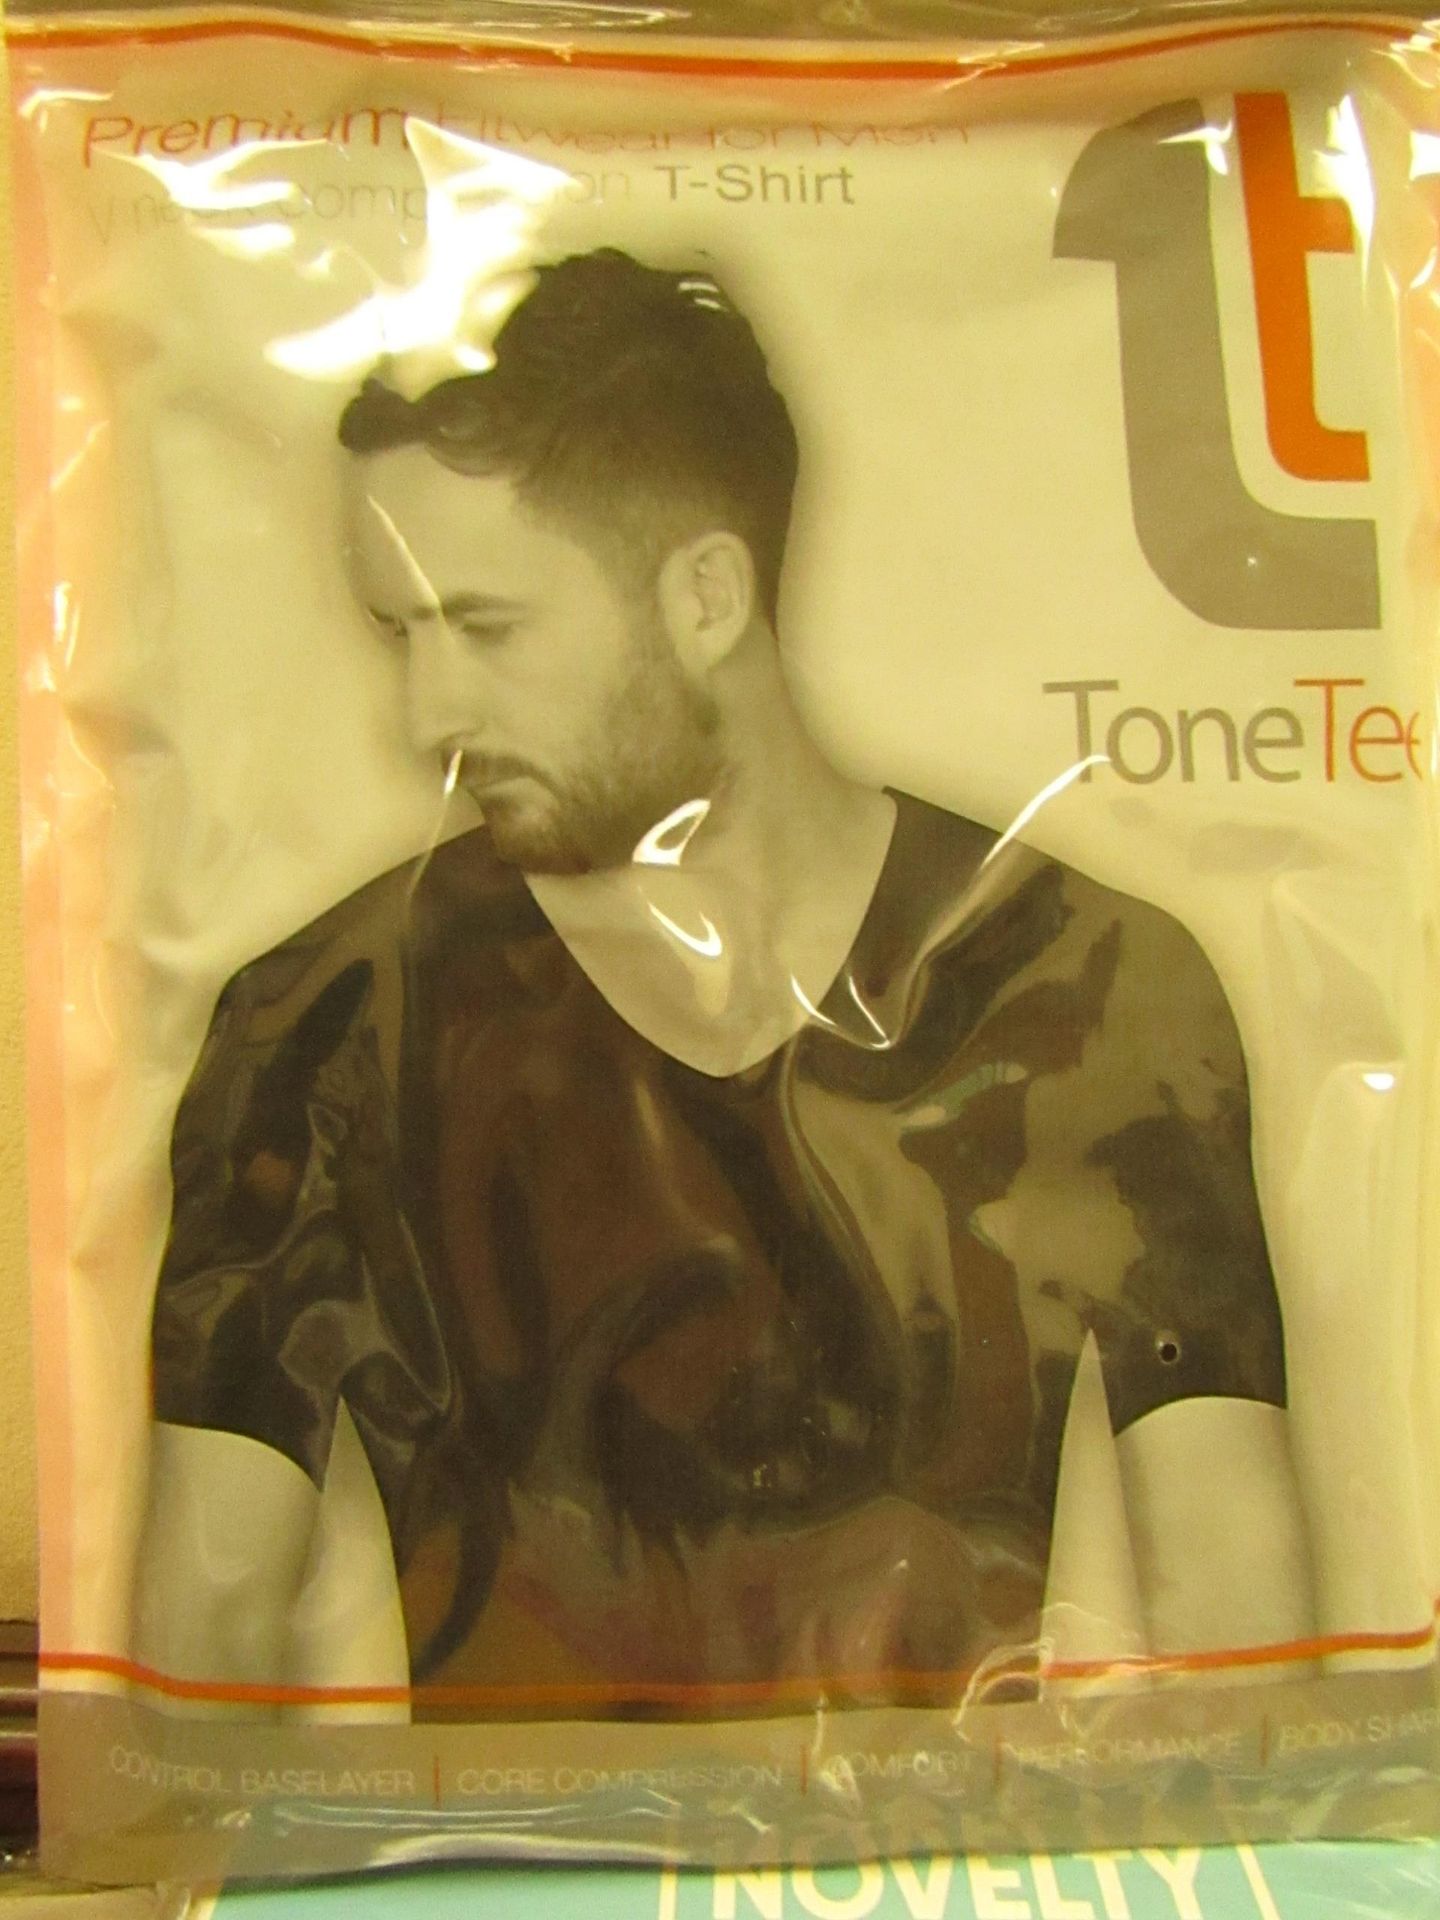 | 1x | MENS TONE TEE NECK COMPRESSION T-SHIRT BLACK SIZE XL | NEW & PACKAGED |